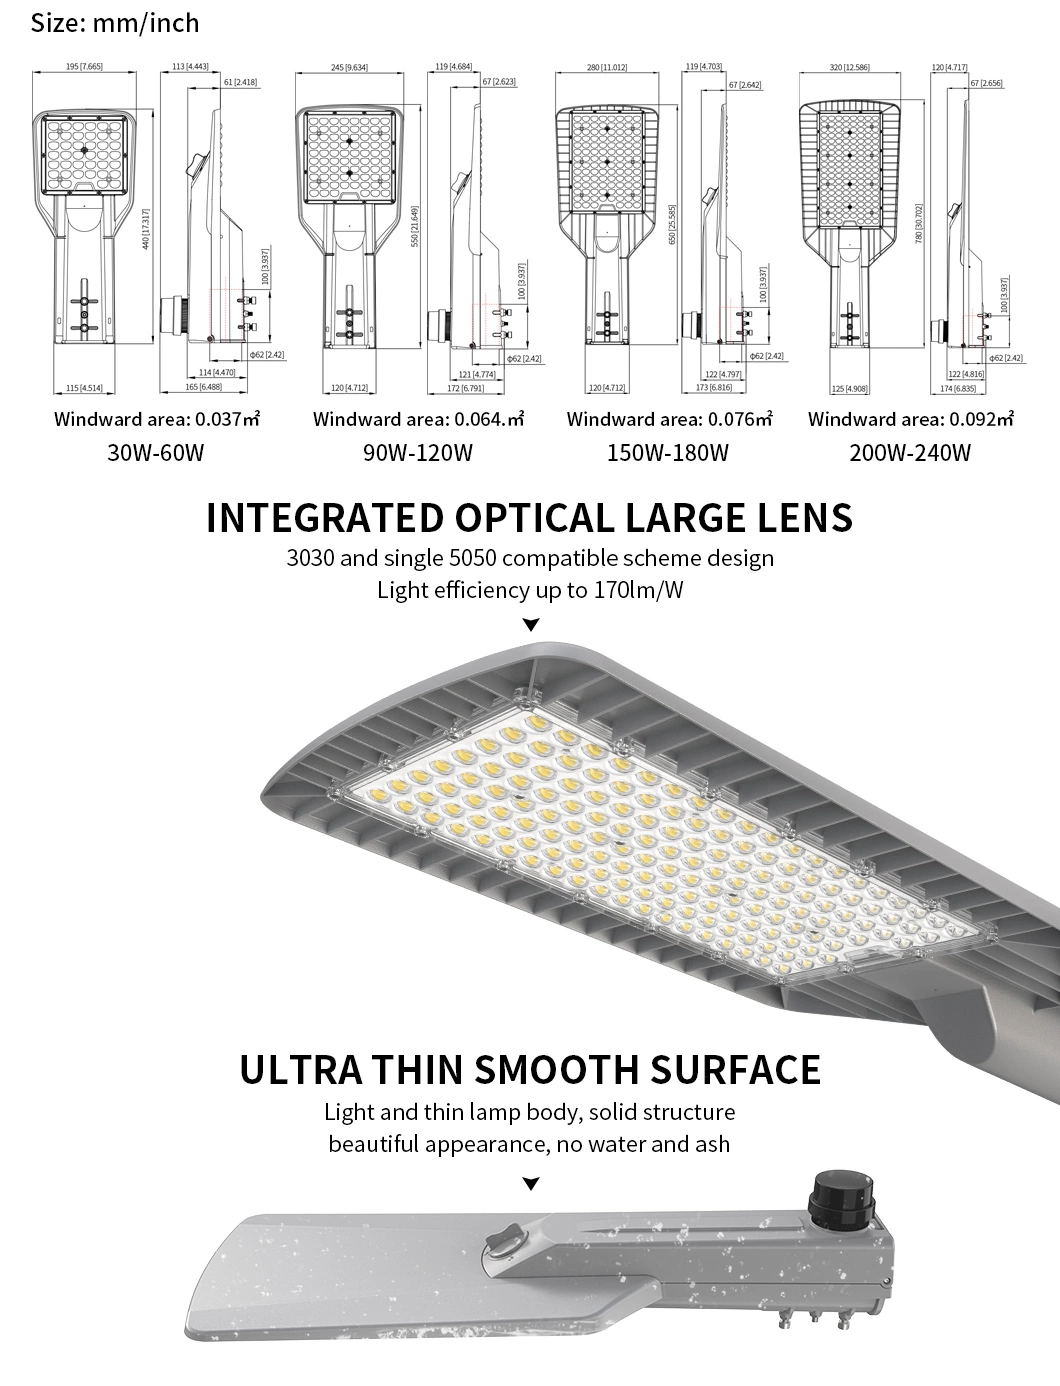 LED Outdoor Urban Street Light Road Lighting From 30W to 240W